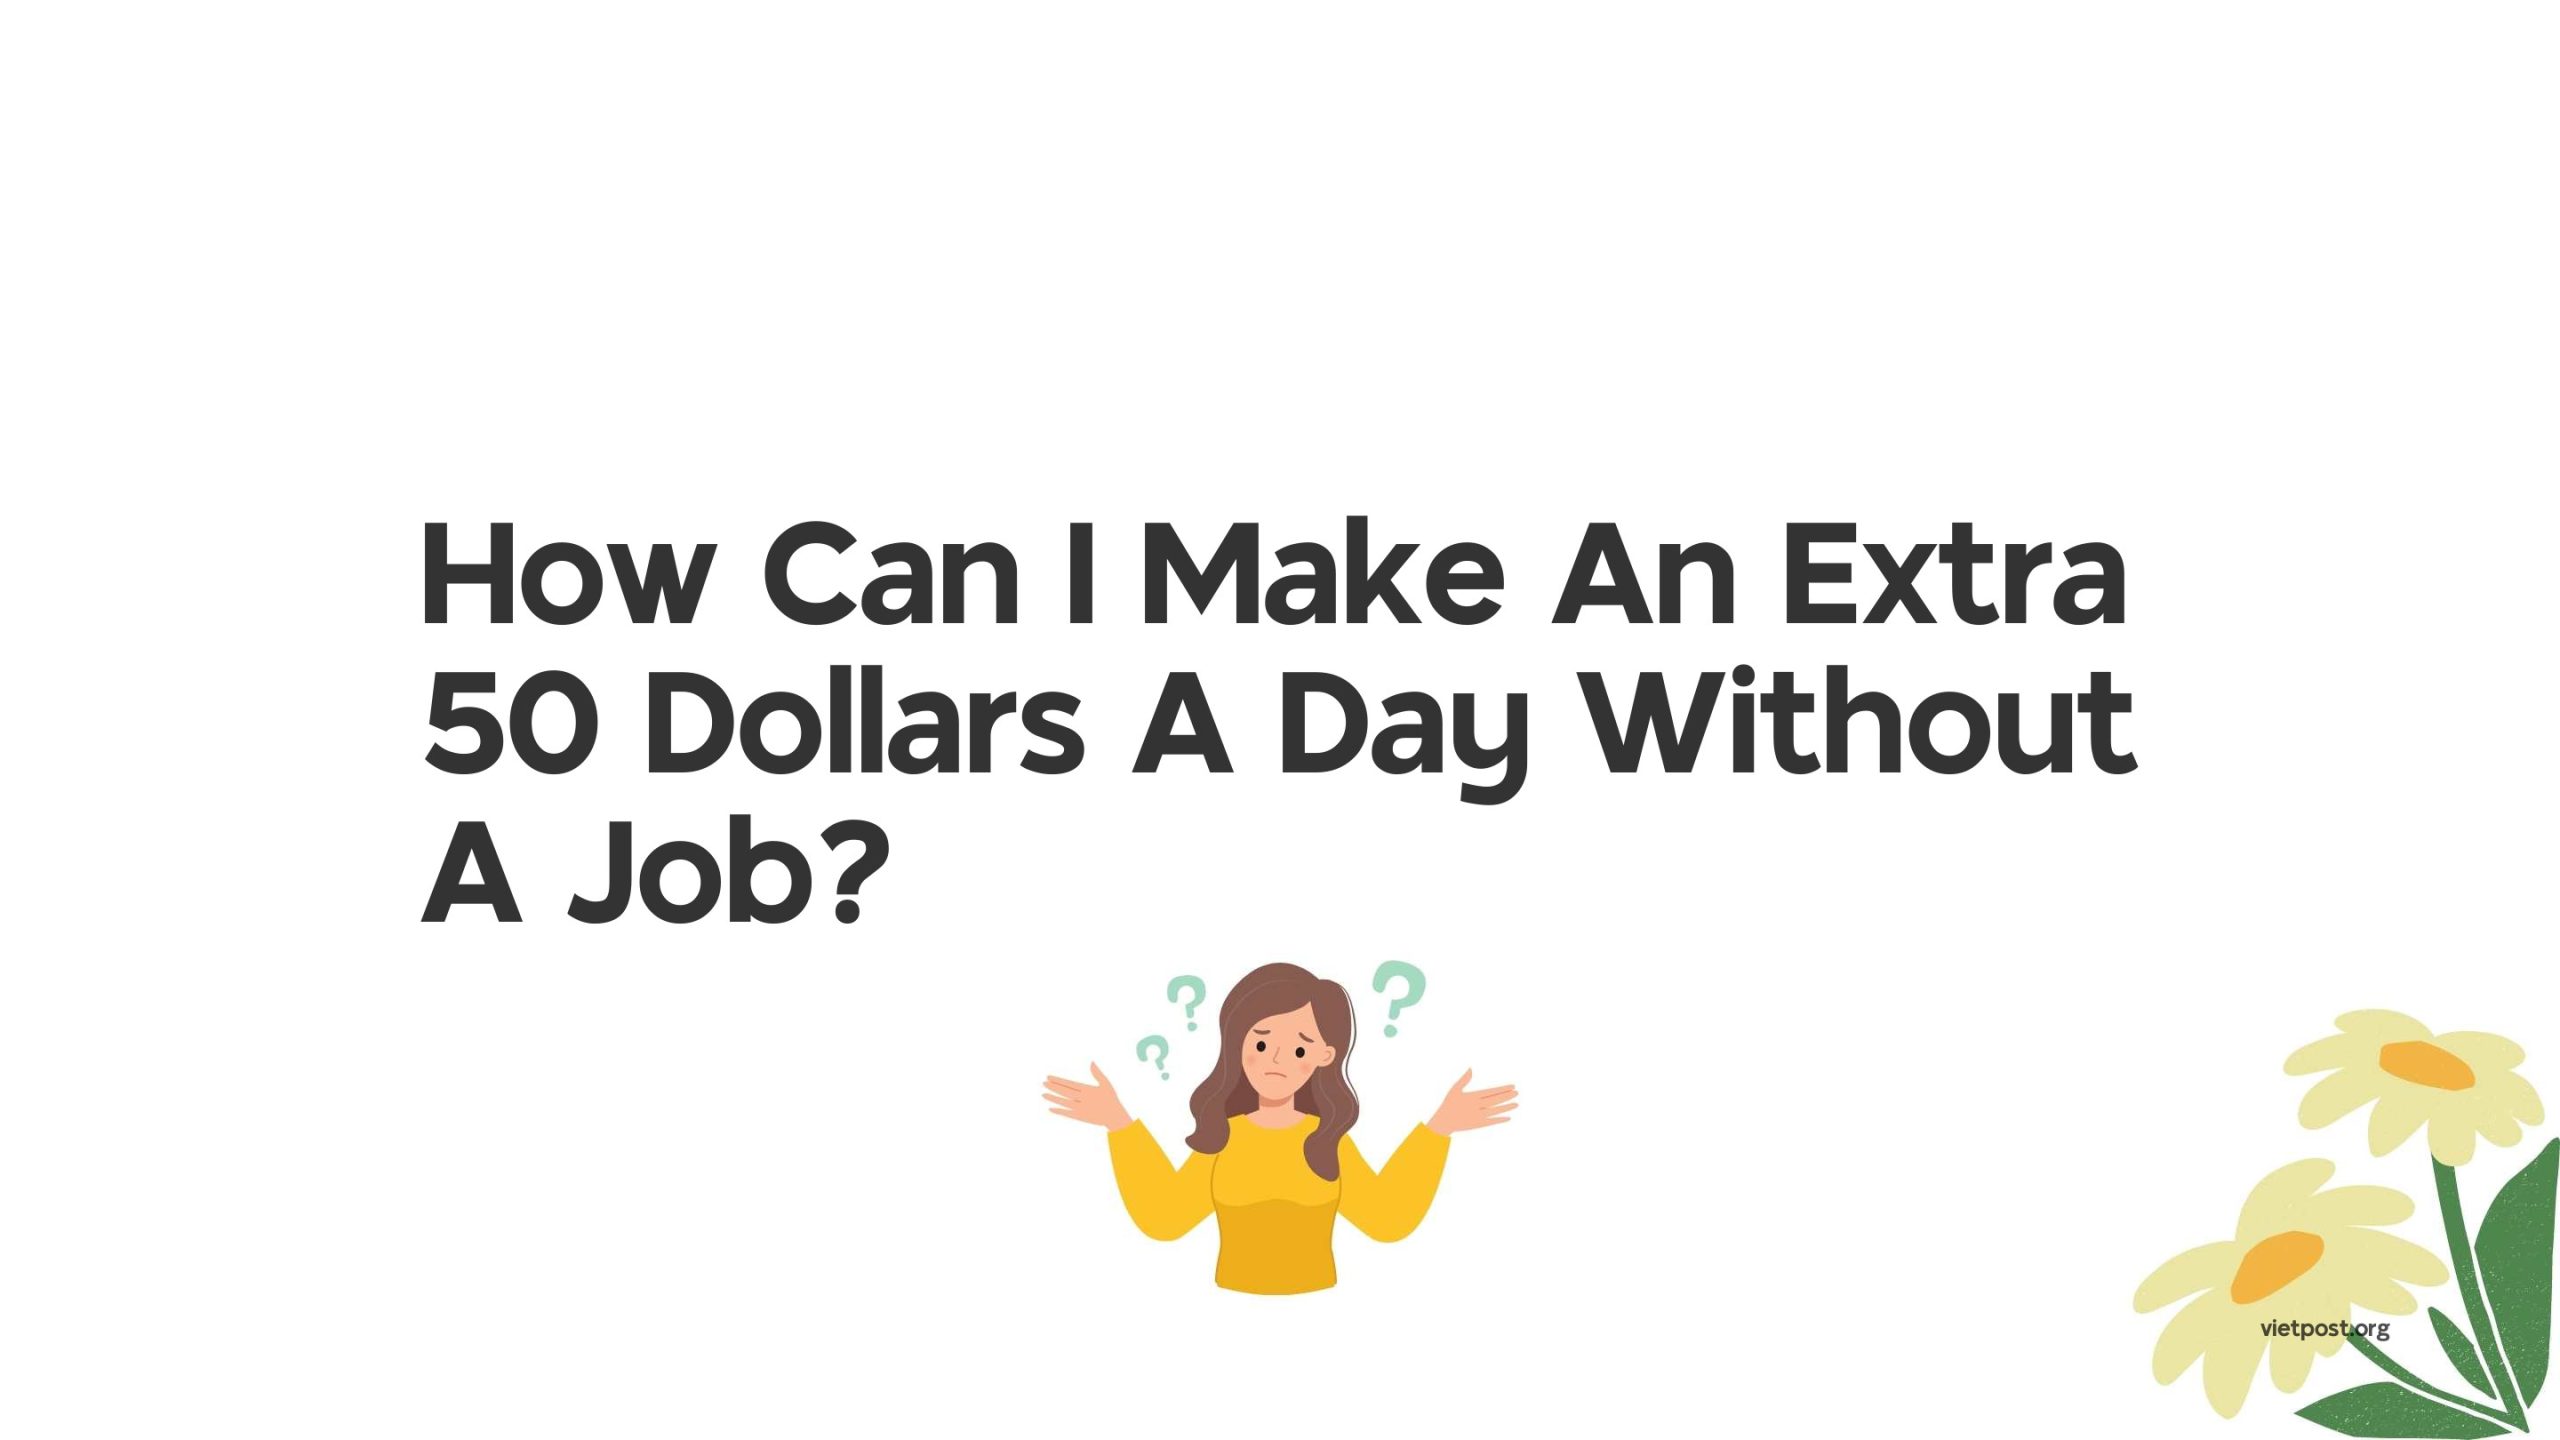 How Can I Make An Extra 50 Dollars A Day Without A Job?